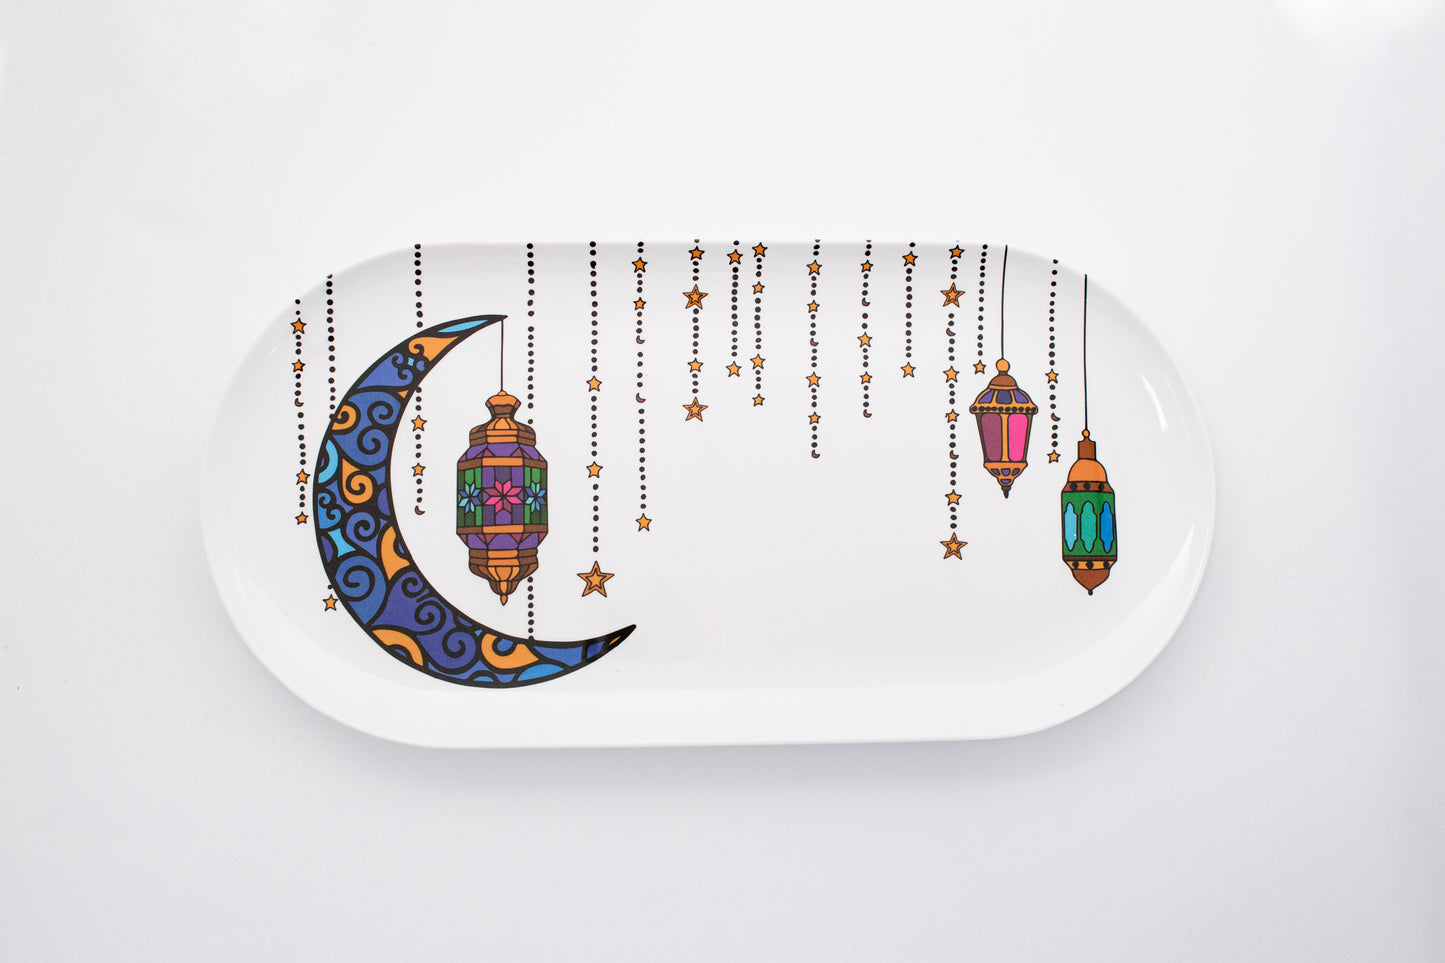 Serving Platter Tray   Set of   ( 2 pieces )